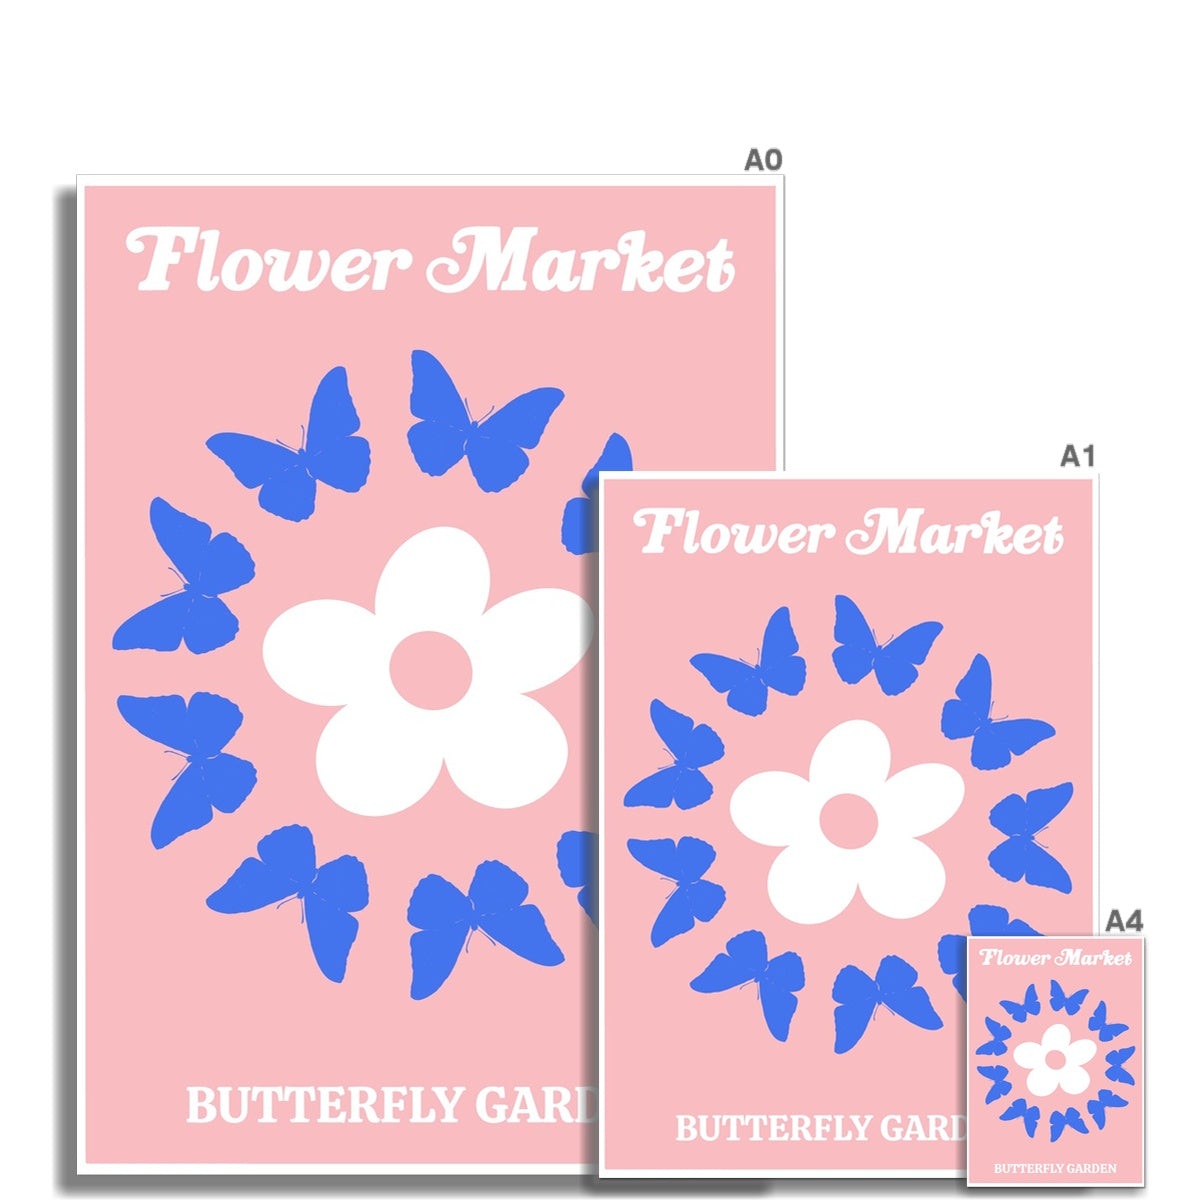 © les muses / Our Flower Market / Butterfly Garden collection features art prints with a retro daisy design and an illustration of butterflies under original hand drawn typography. The danish pastel
poster is an aesthetic addition to any gallery wall.